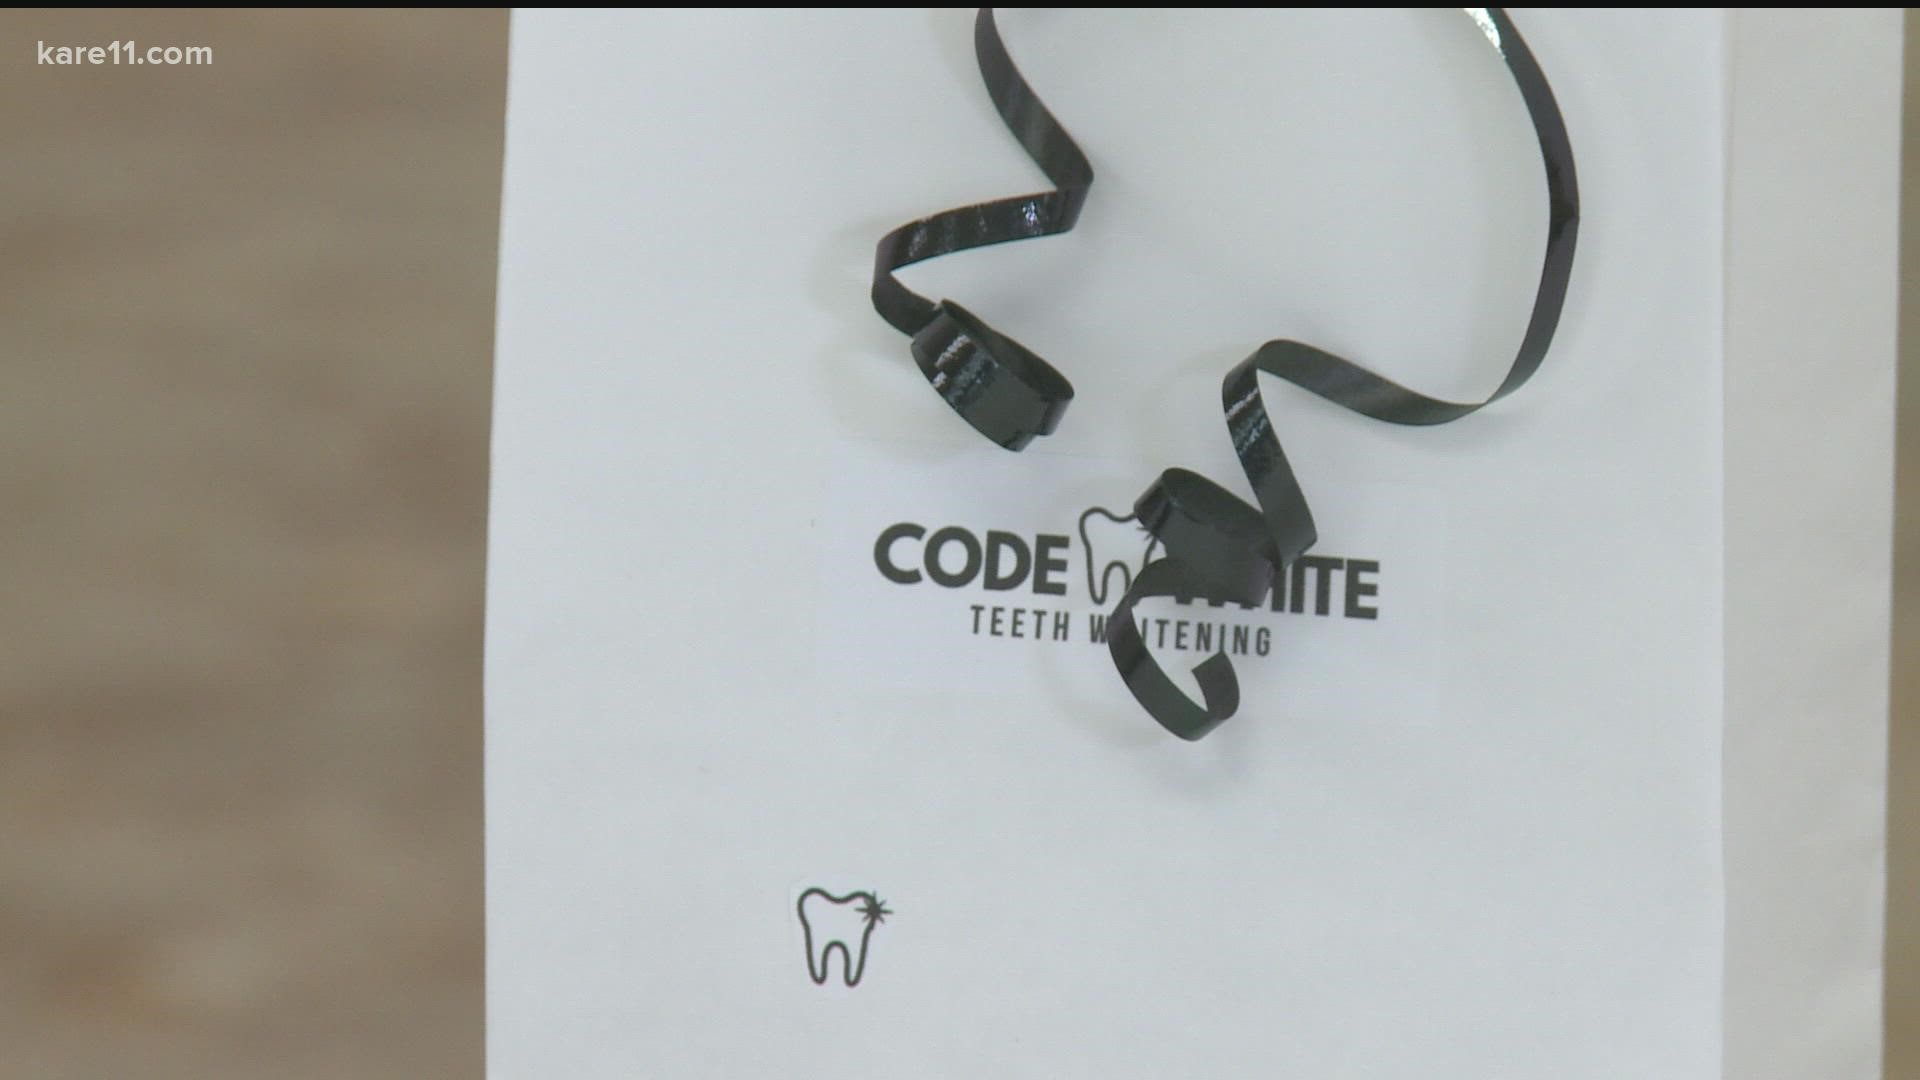 The owners of Code White Teeth Whitening are offering a free oral health class for kids, hoping to reduce future disparities in dental care.